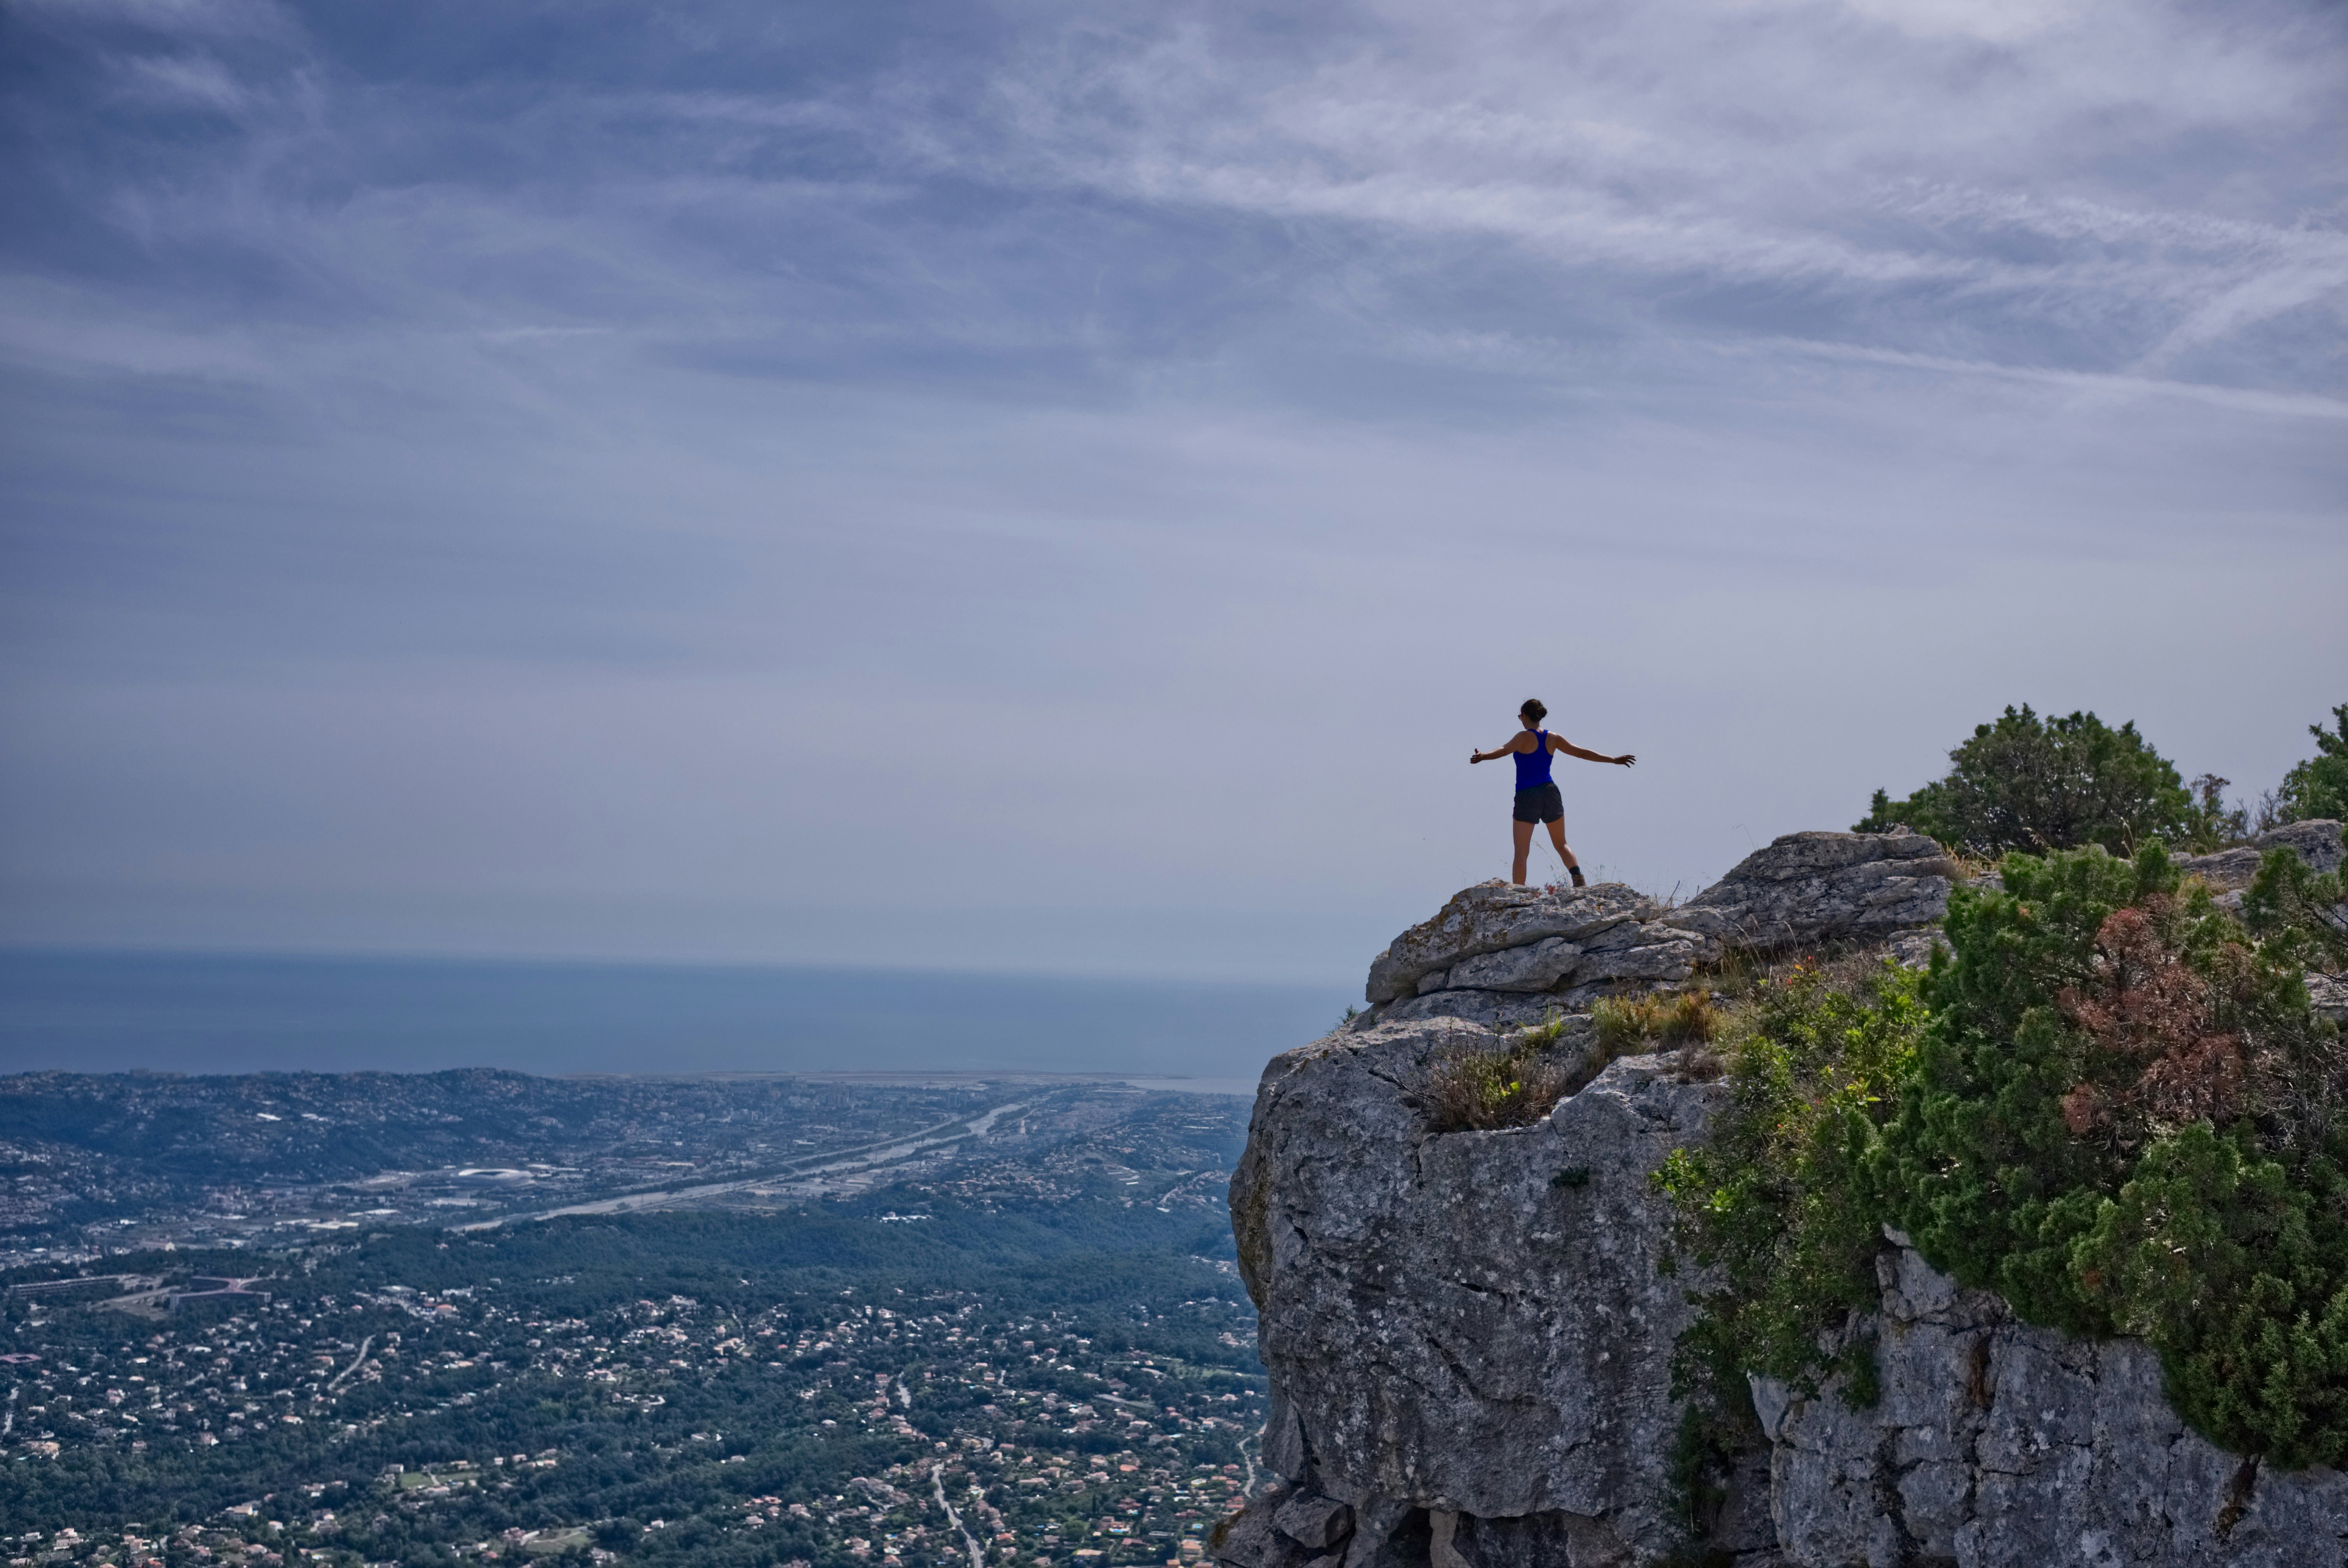 This picture was taken on the Baou de St Jeanette close to Nice after a great, long hike. The view up there was amazing, we could see all over Nice up to Monaco since the day was beautiful and clear.